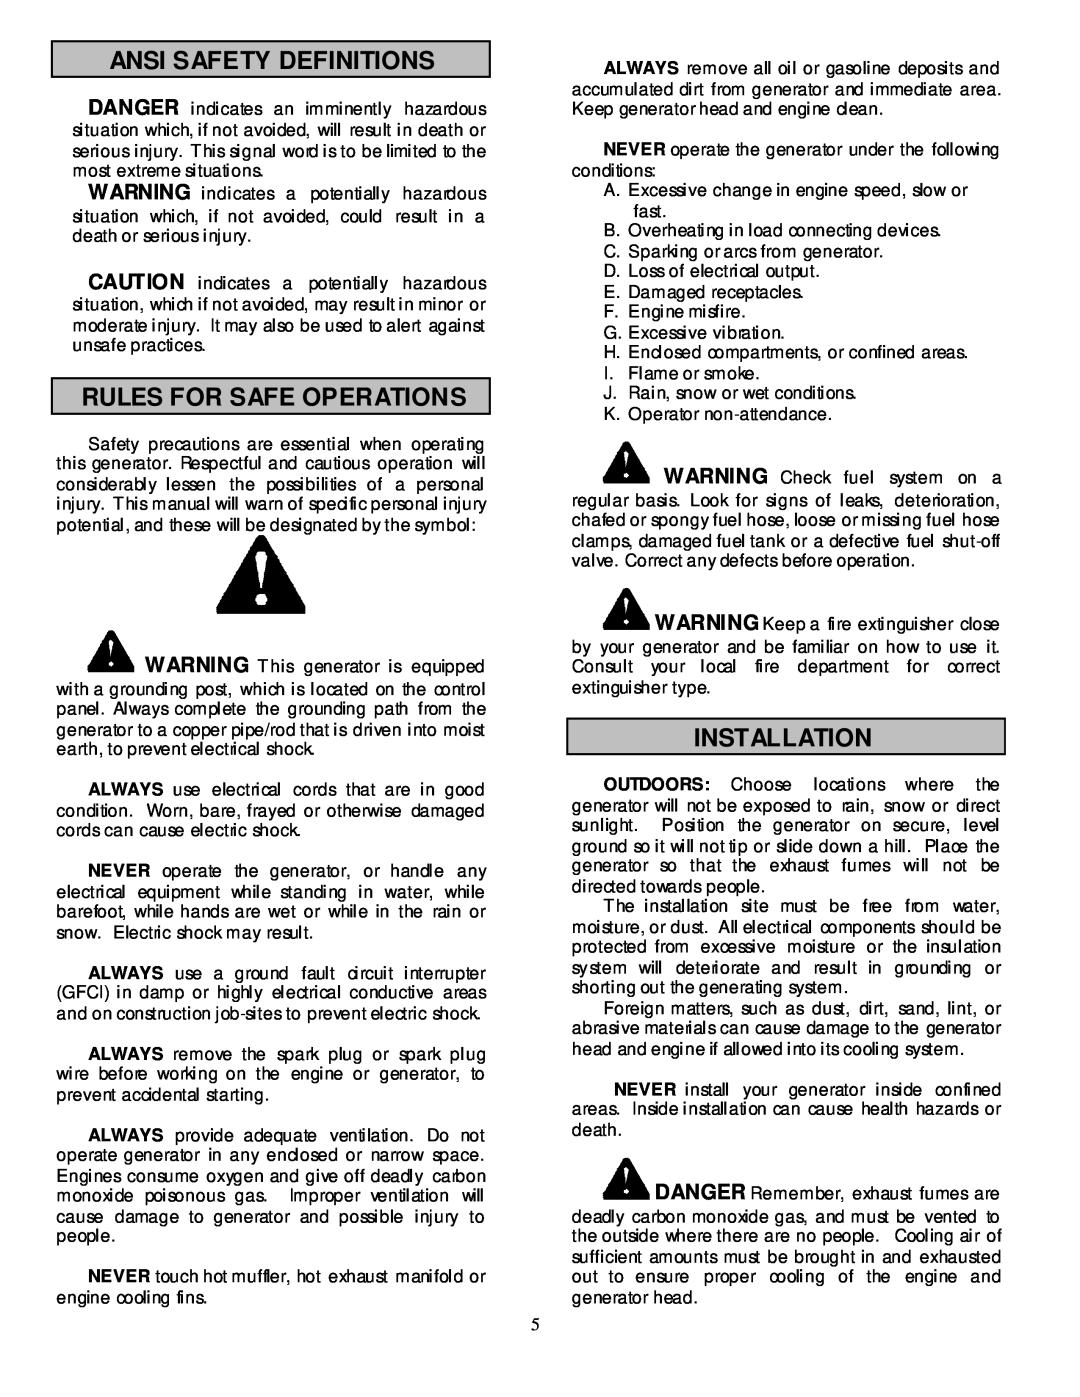 North Star 8000 PPG owner manual Ansi Safety Definitions, Rules For Safe Operations, Installation 